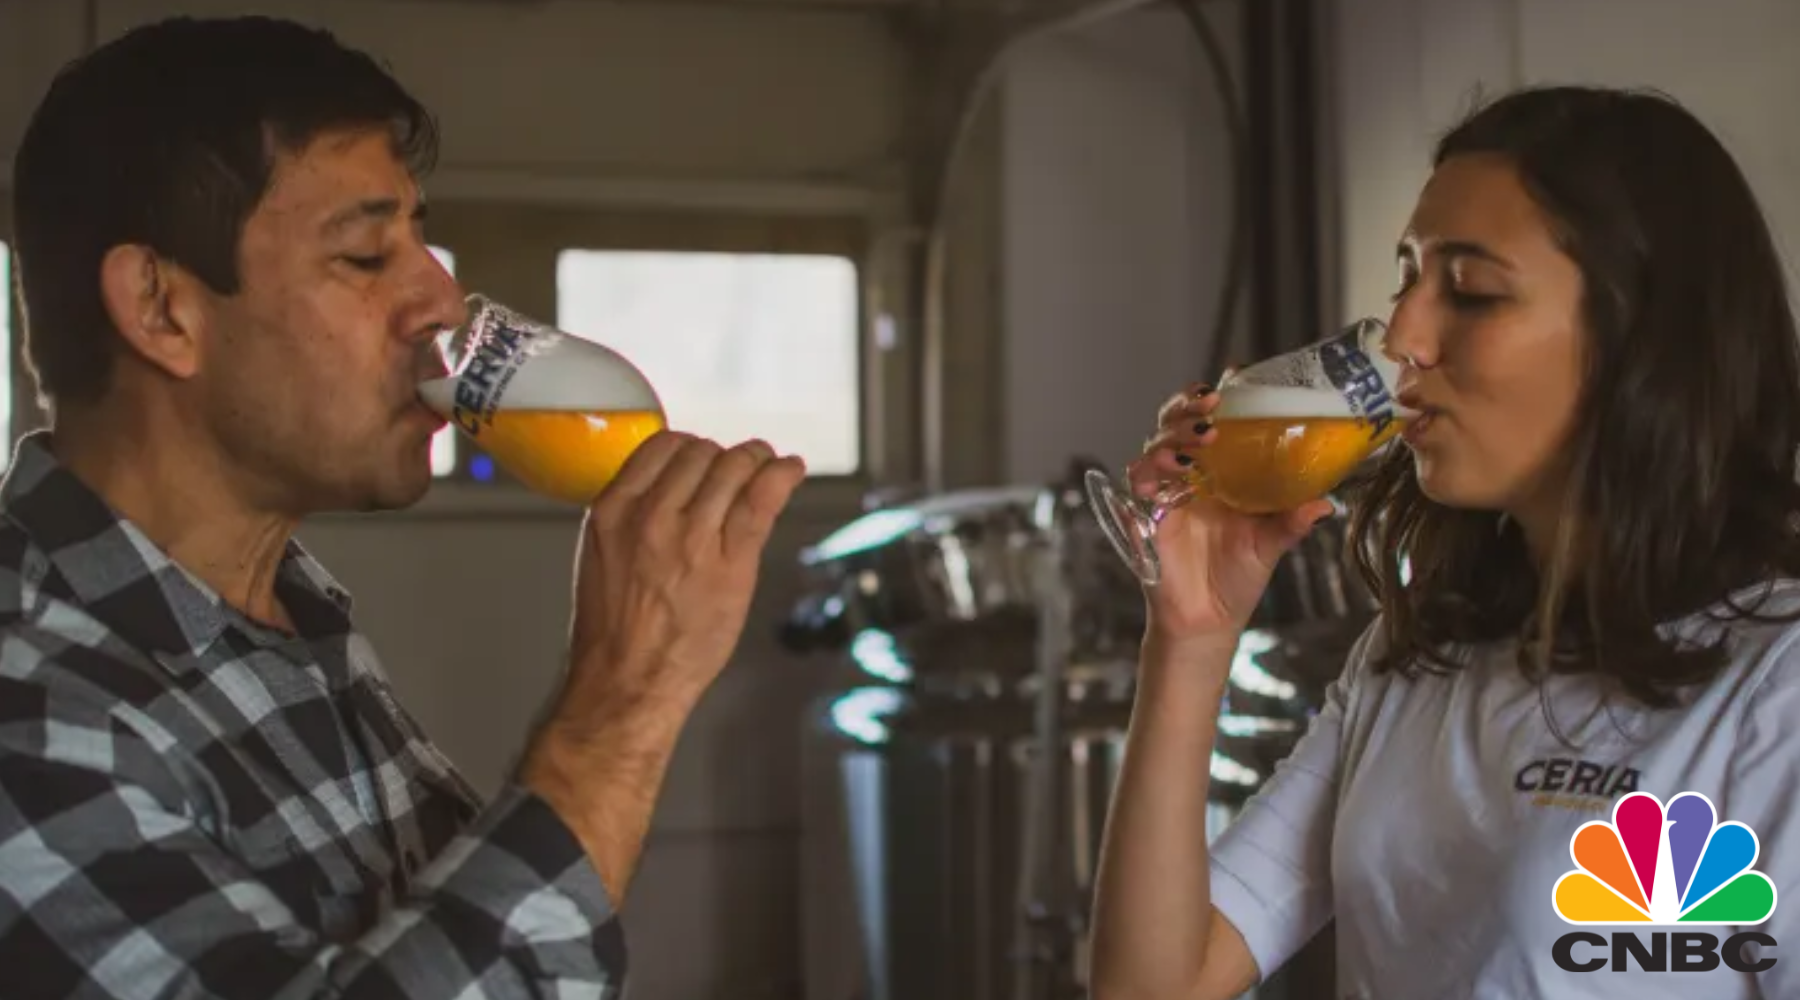 CNBC: Denver and its craft breweries embrace nonalcoholic beer, spirits